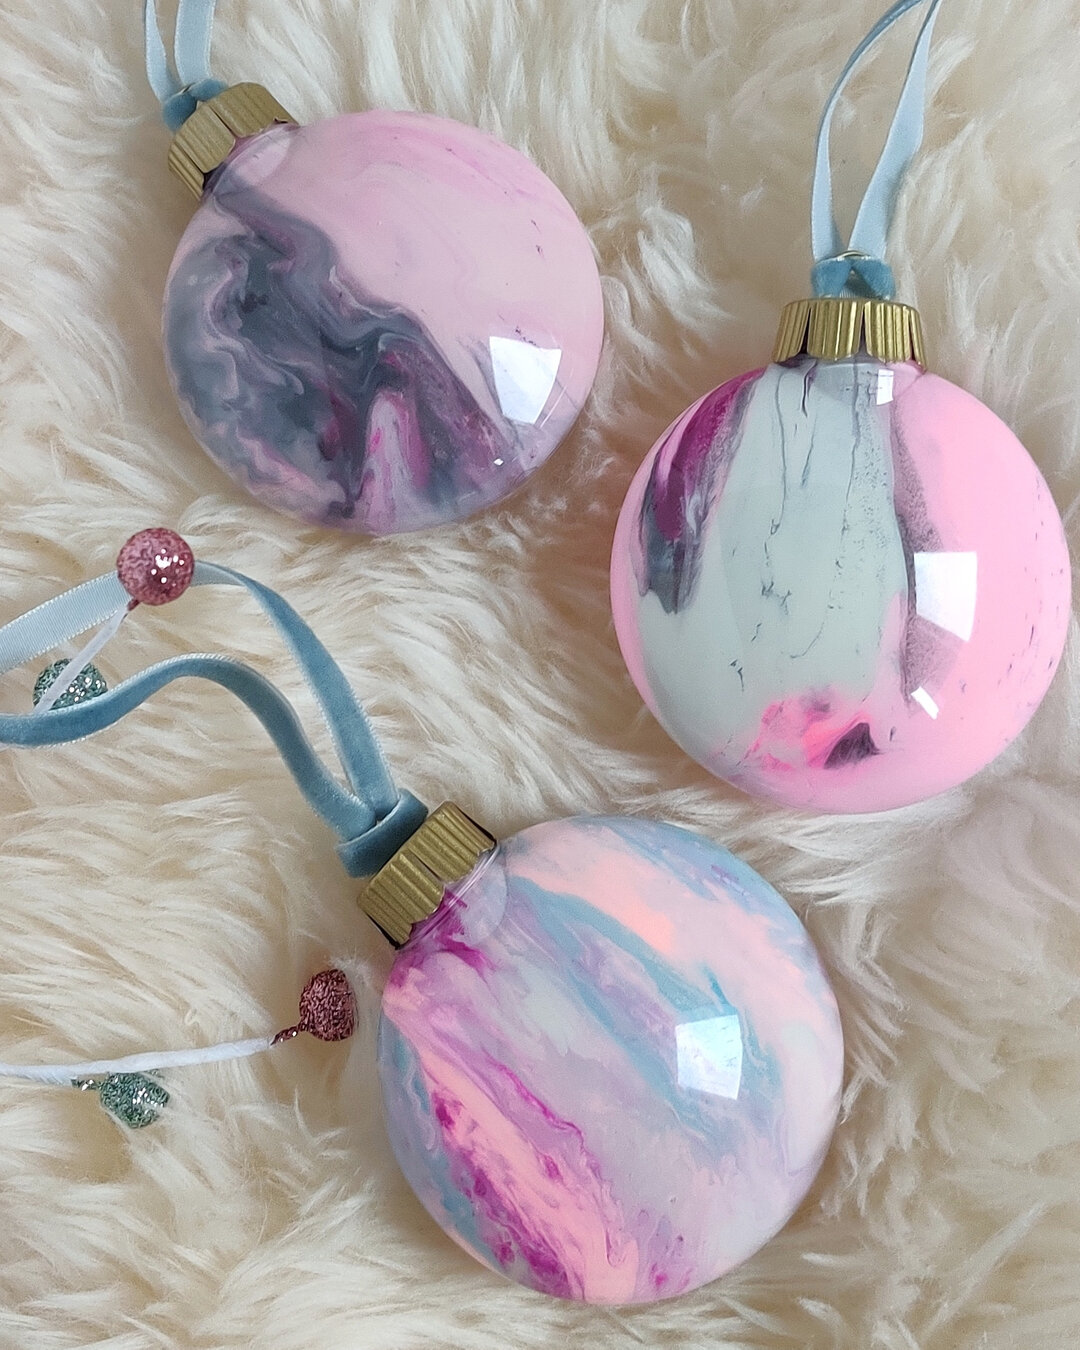 Lots of ornaments still available! 🎄 My art shop is closing over the holidays, so be sure to get your orders in soon! ⠀⠀⠀⠀⠀⠀⠀⠀⠀
⠀⠀⠀⠀⠀⠀⠀⠀⠀
If you need a last minute gift, these ornaments ship by express post, and I'll be fulfilling orders as they com